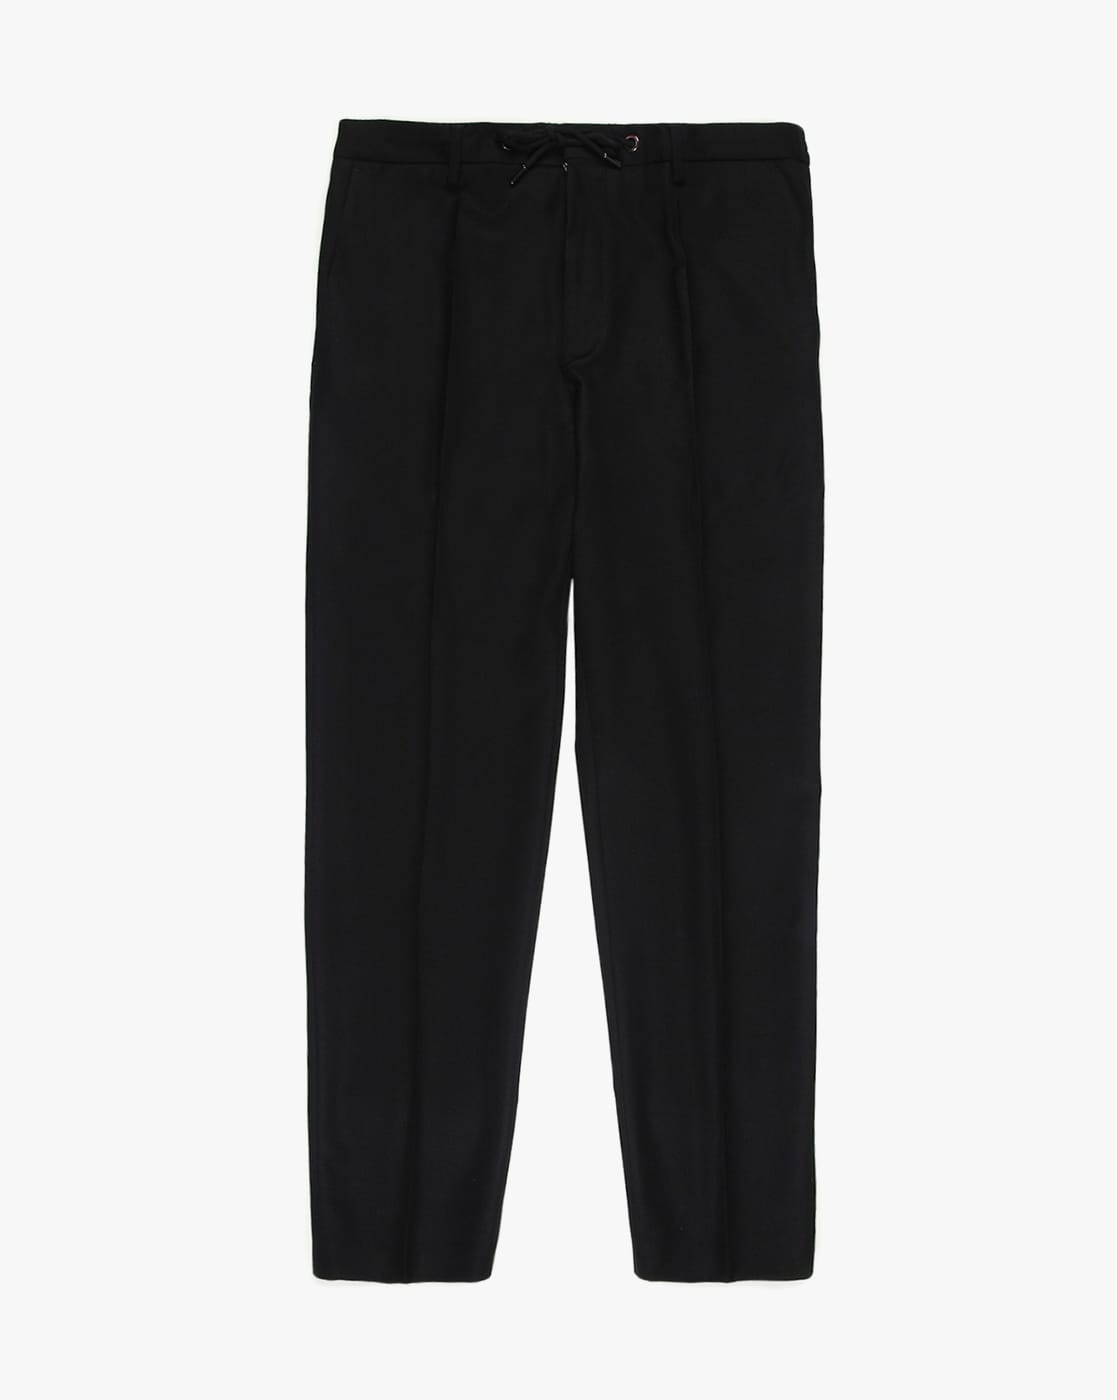 Natalie 1950s Trousers Black Flannel from Vivien of Holloway